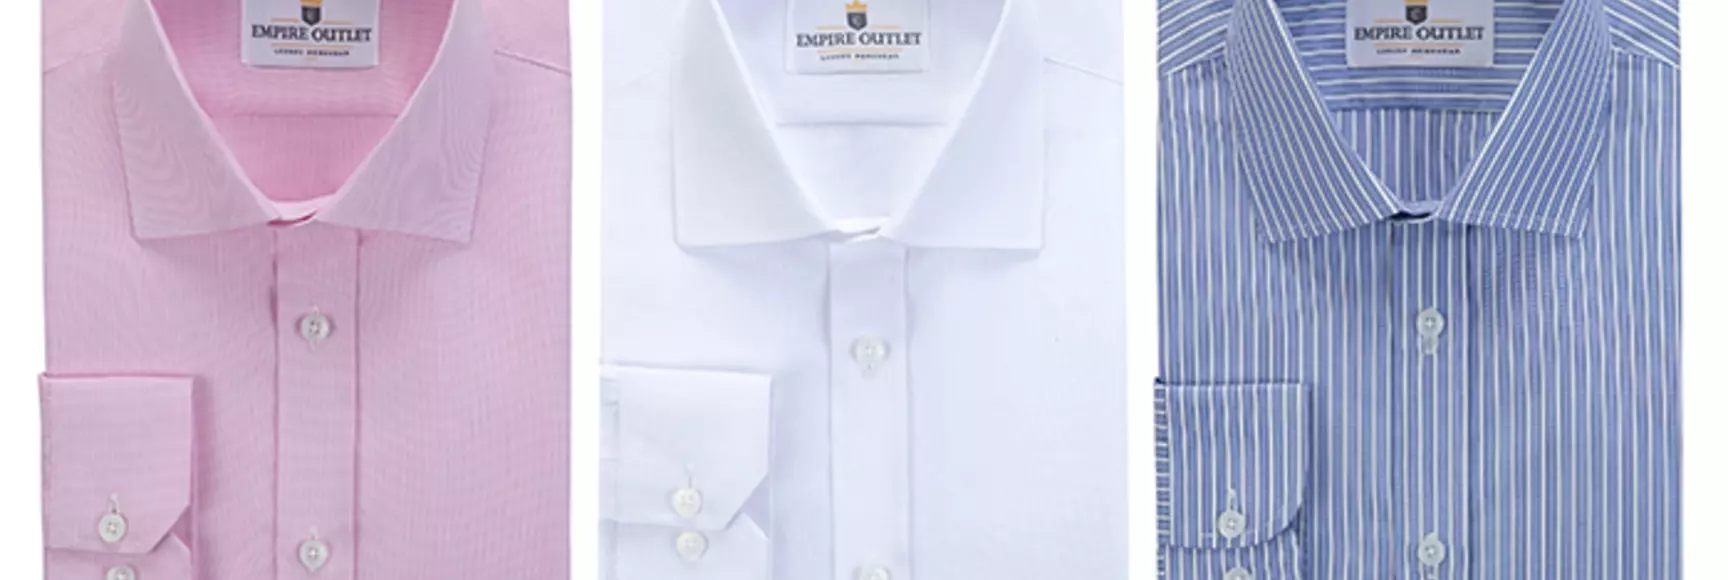 Empire Outlet dress shirts offer classic tailoring and the moisture-wicking, easy care performance of COOLMAX® technology.